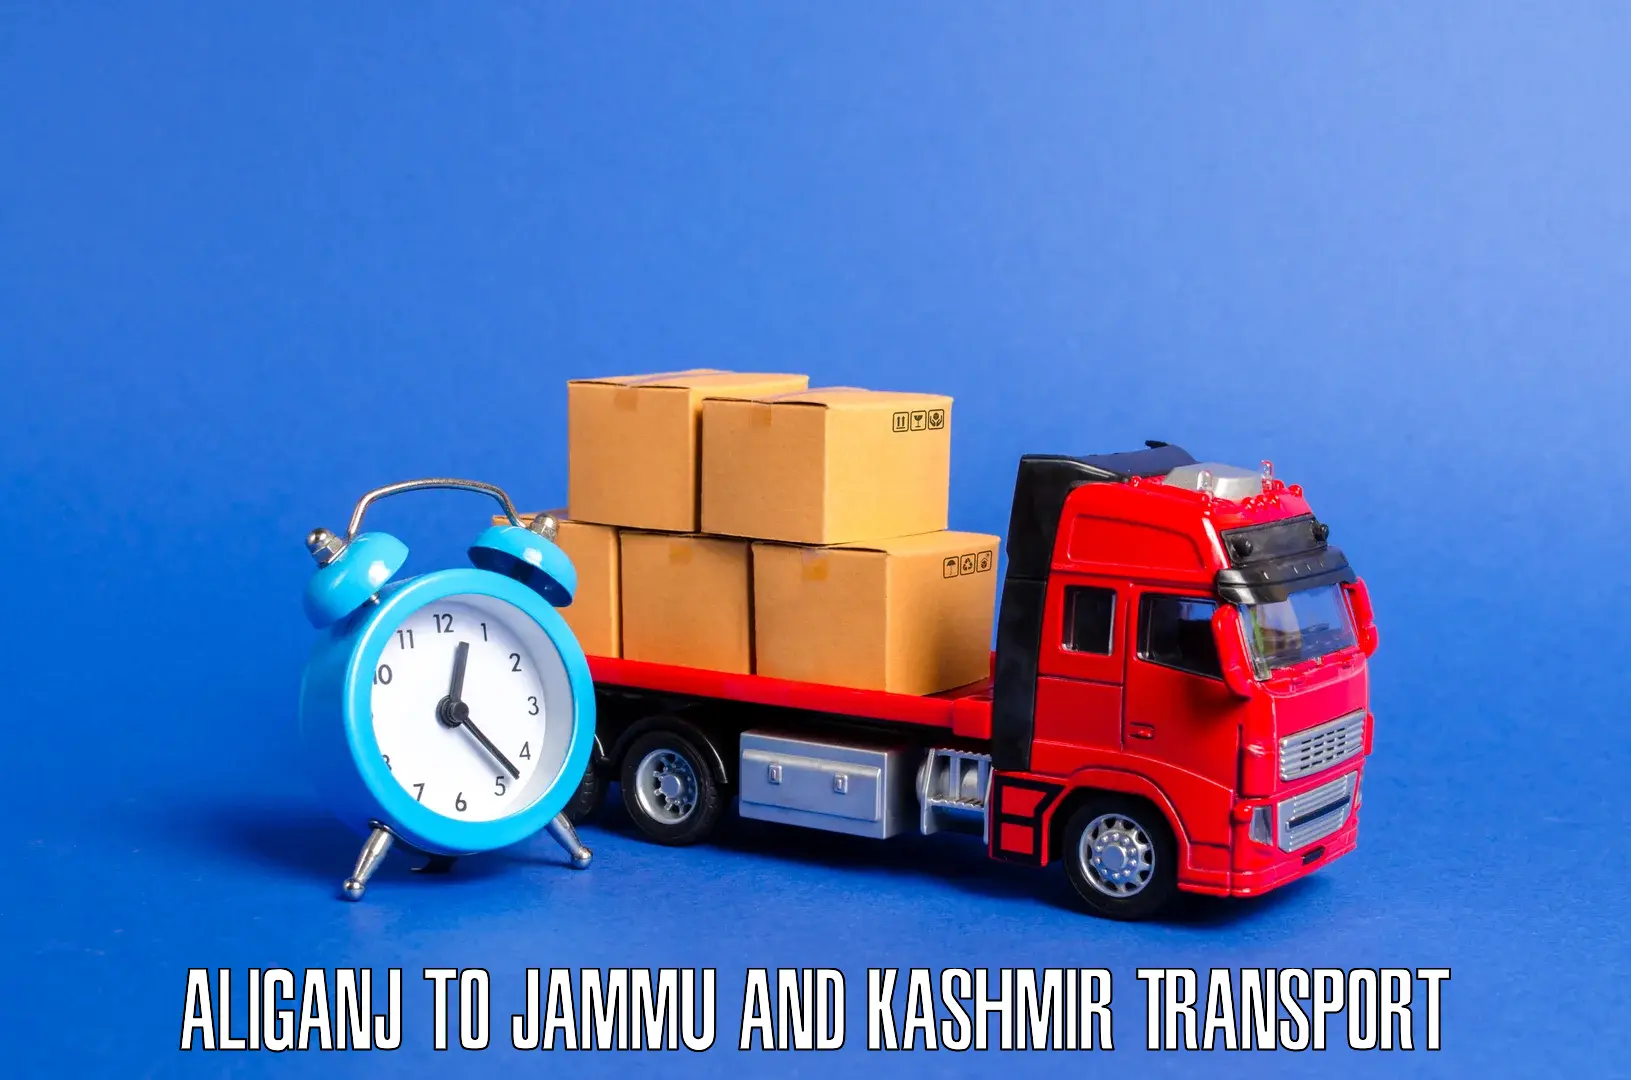 Nearby transport service Aliganj to Reasi